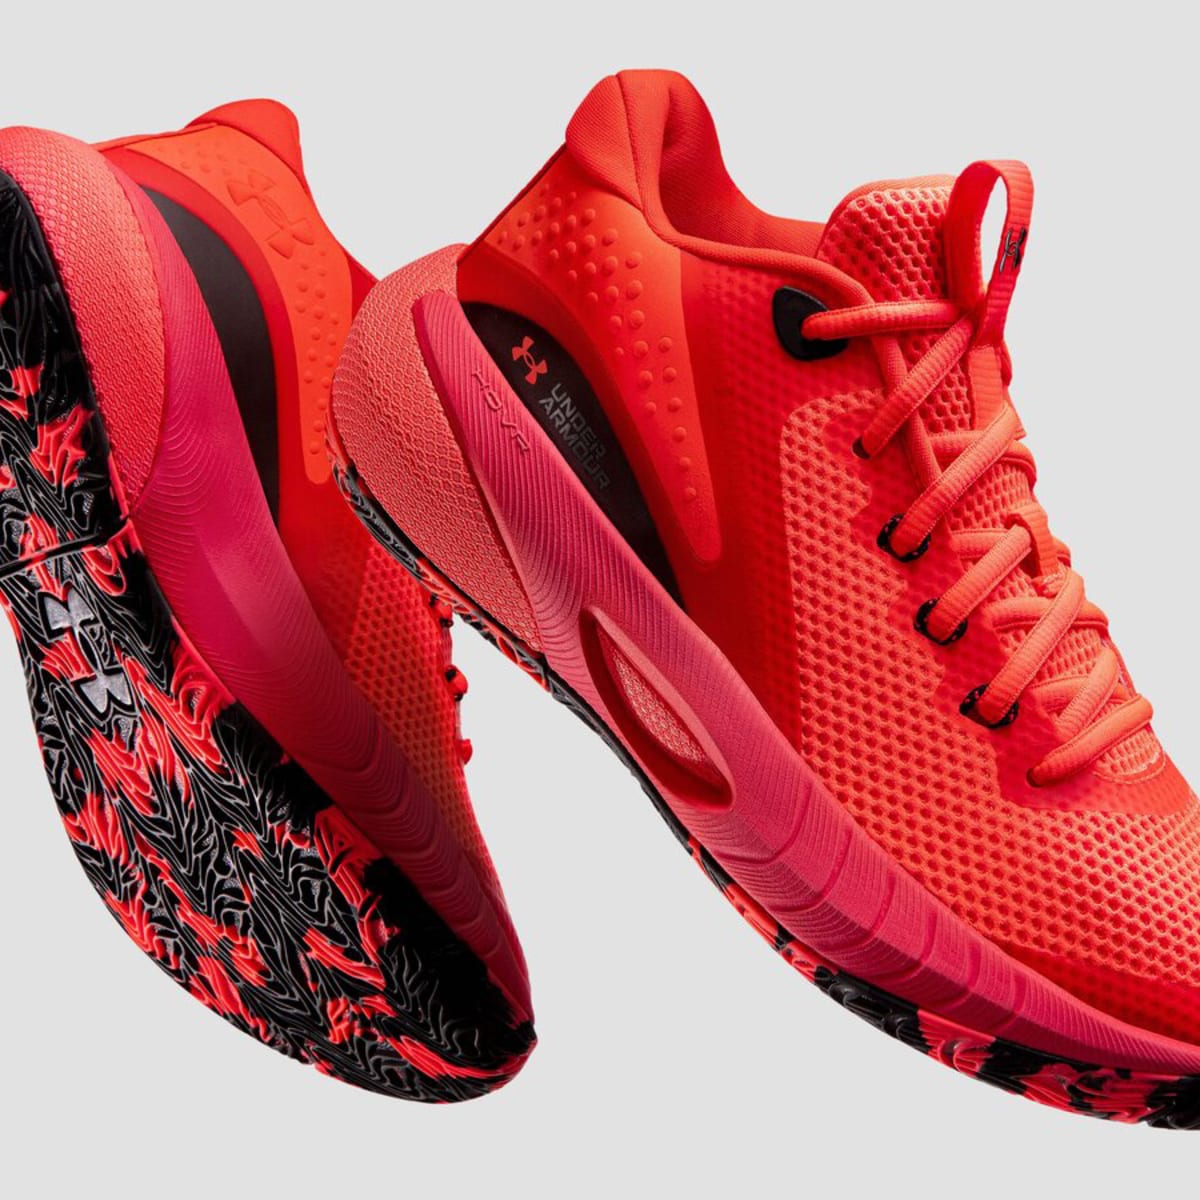 Under Armour grows presence within the WNBA with new sneakers